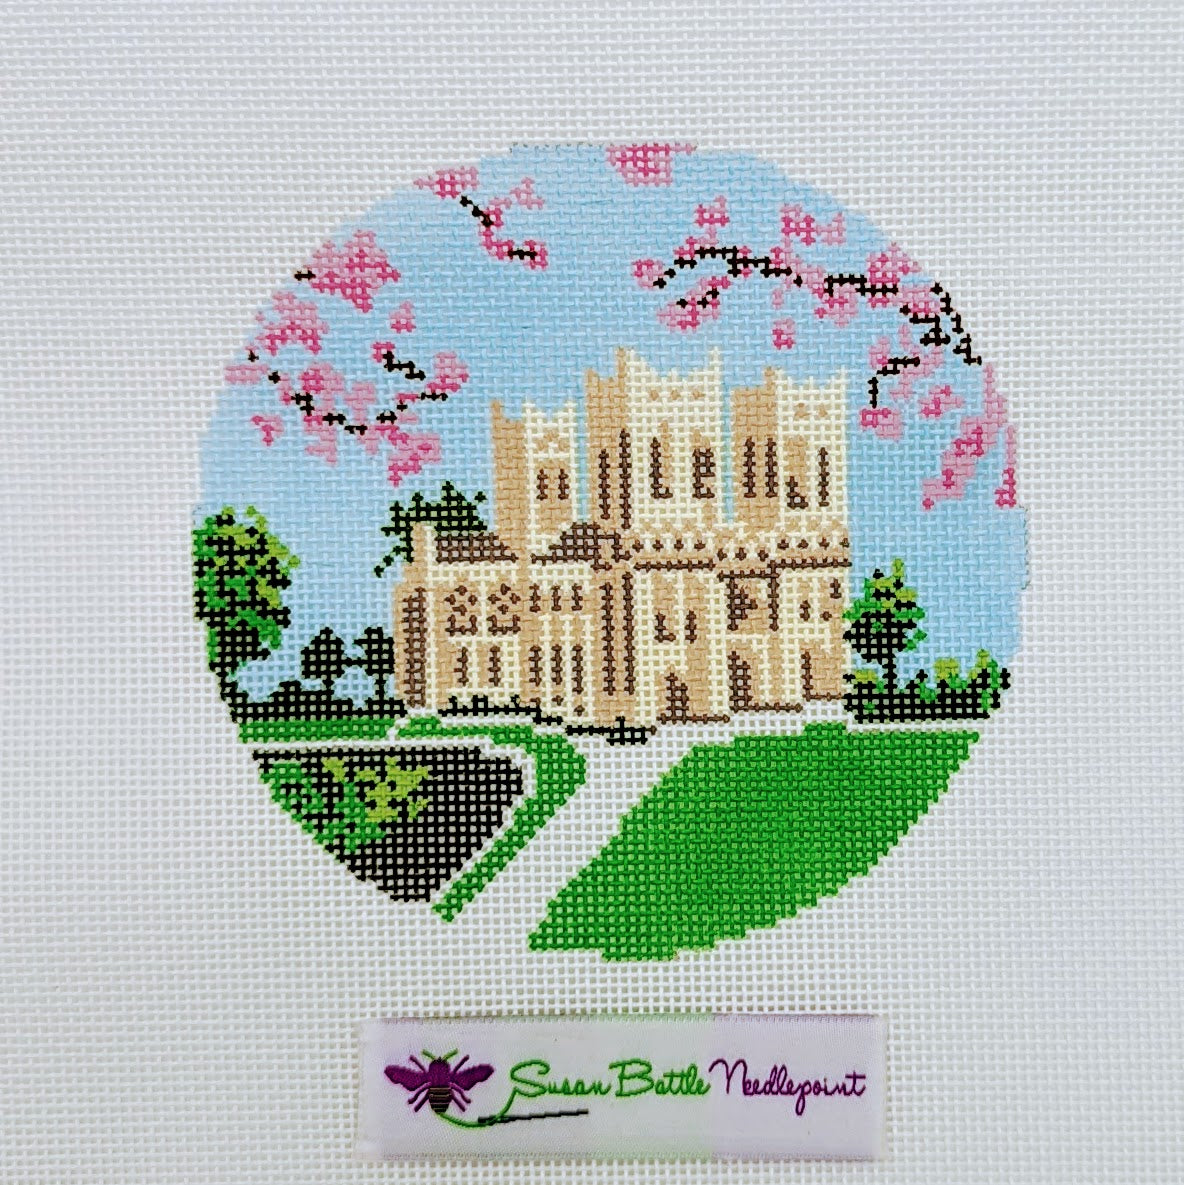 Washington National Cathedral with Cherry Blossoms ornament